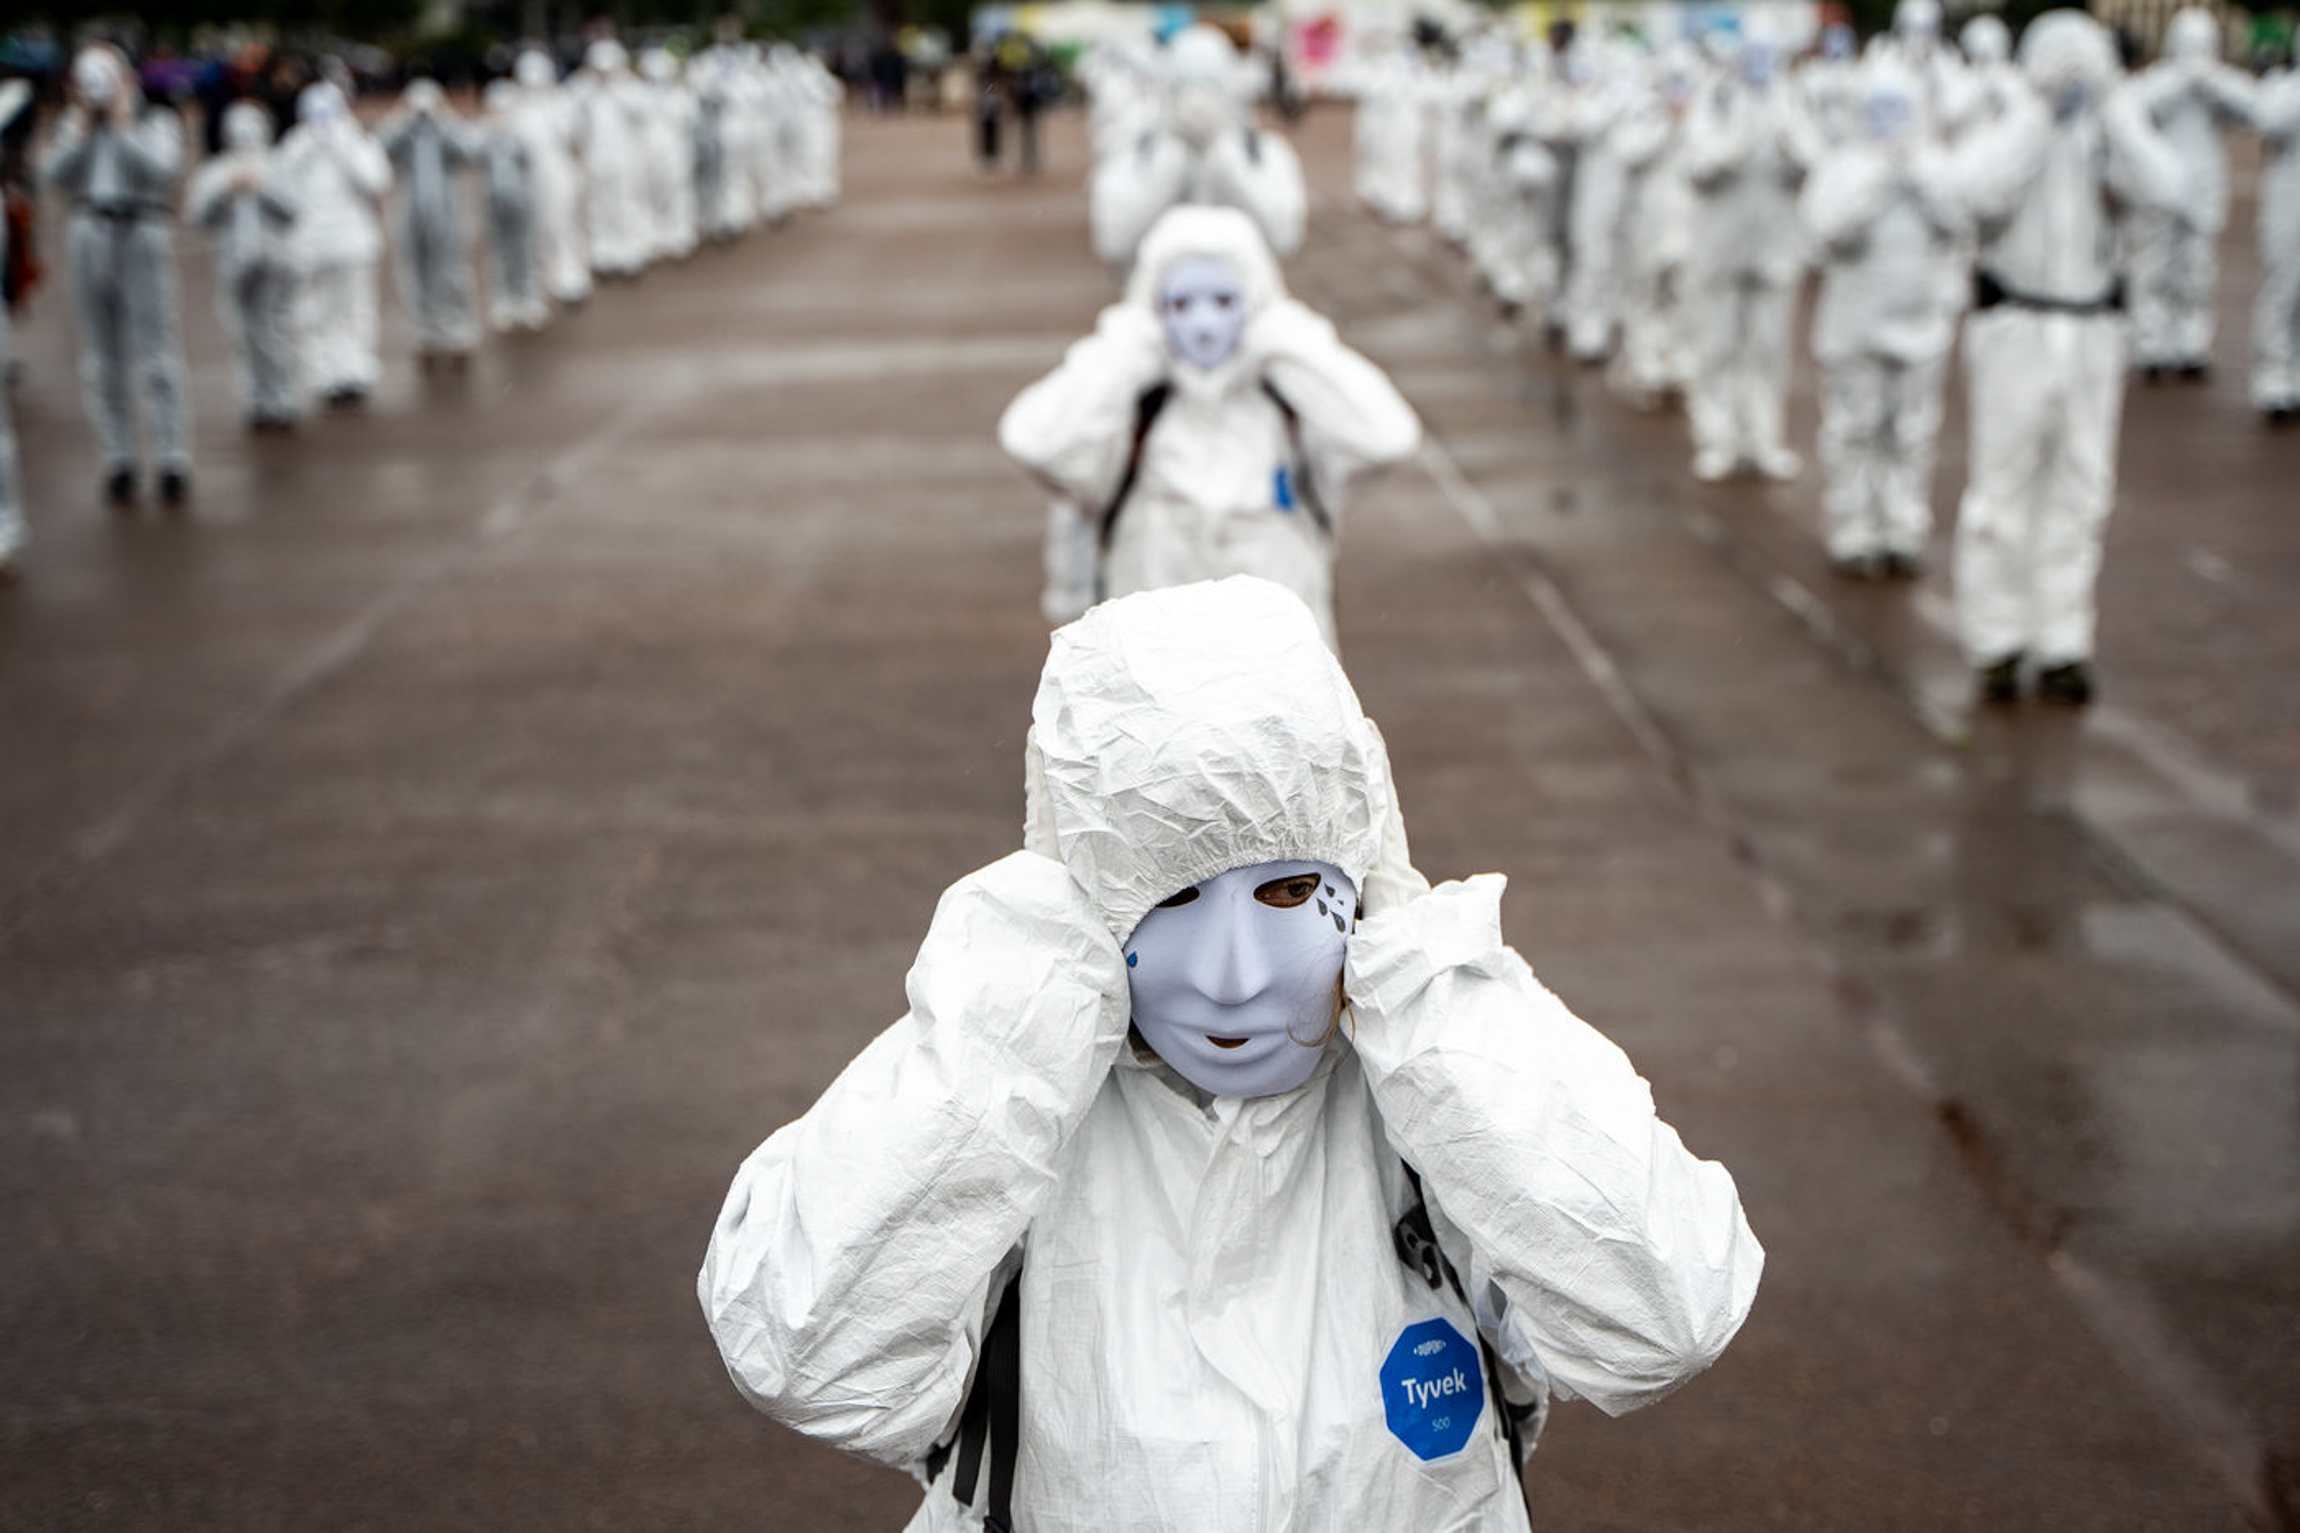 White Mask rally against mask-wearing and pandemic restrictions. Lyon, France, 15 May 2021 (Nicolas Liponne)